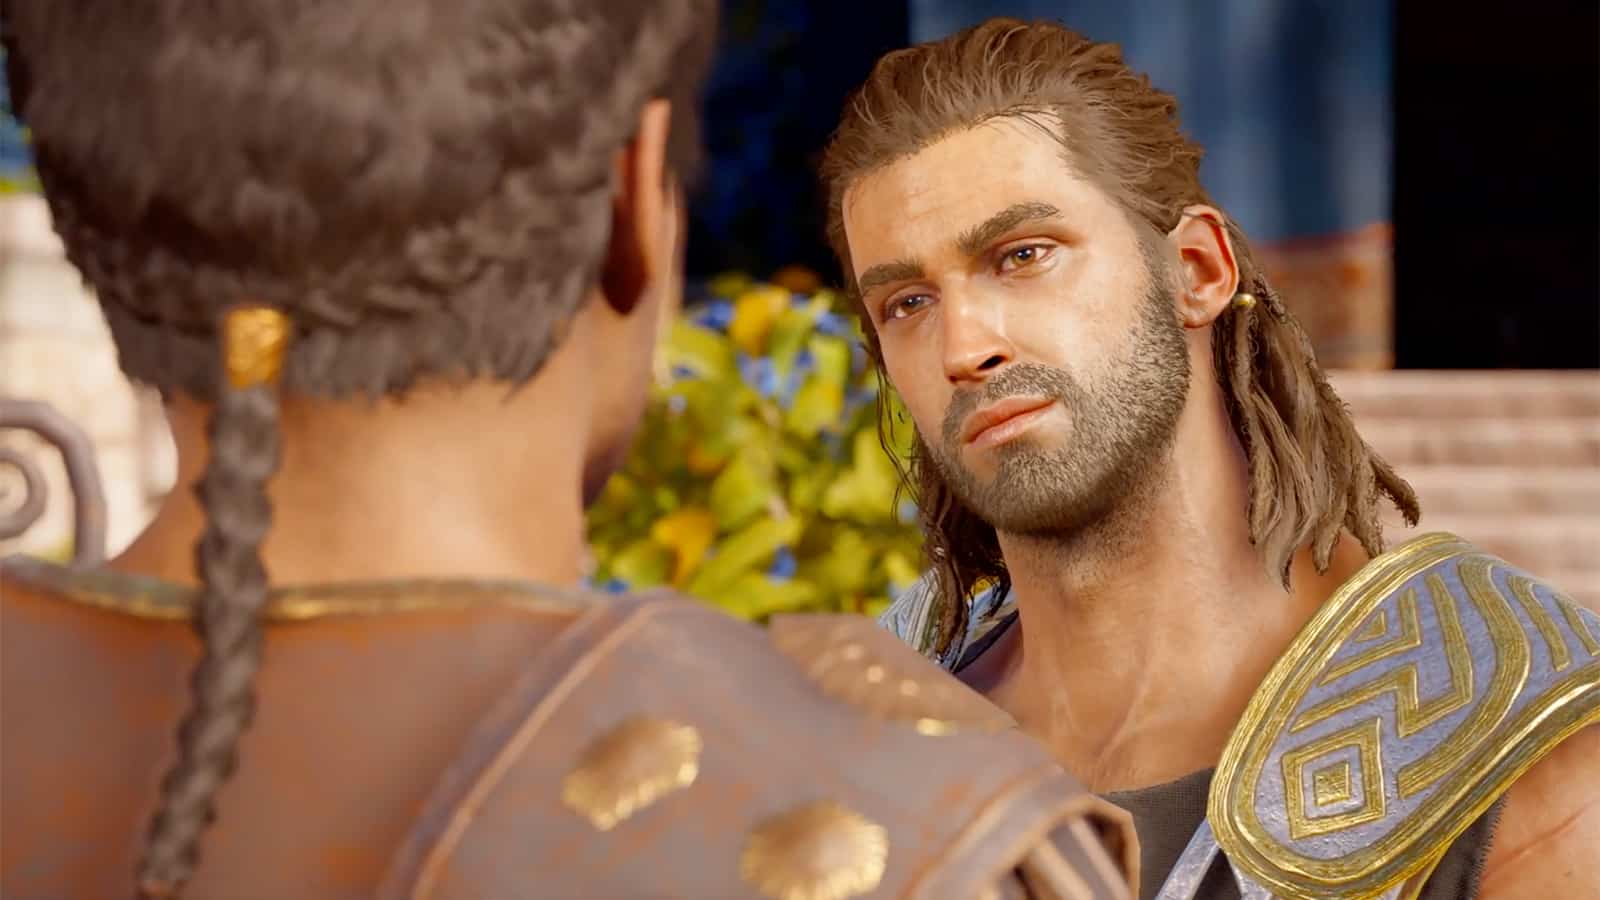 A queer dating scene in Assassin's Creed Odyssey